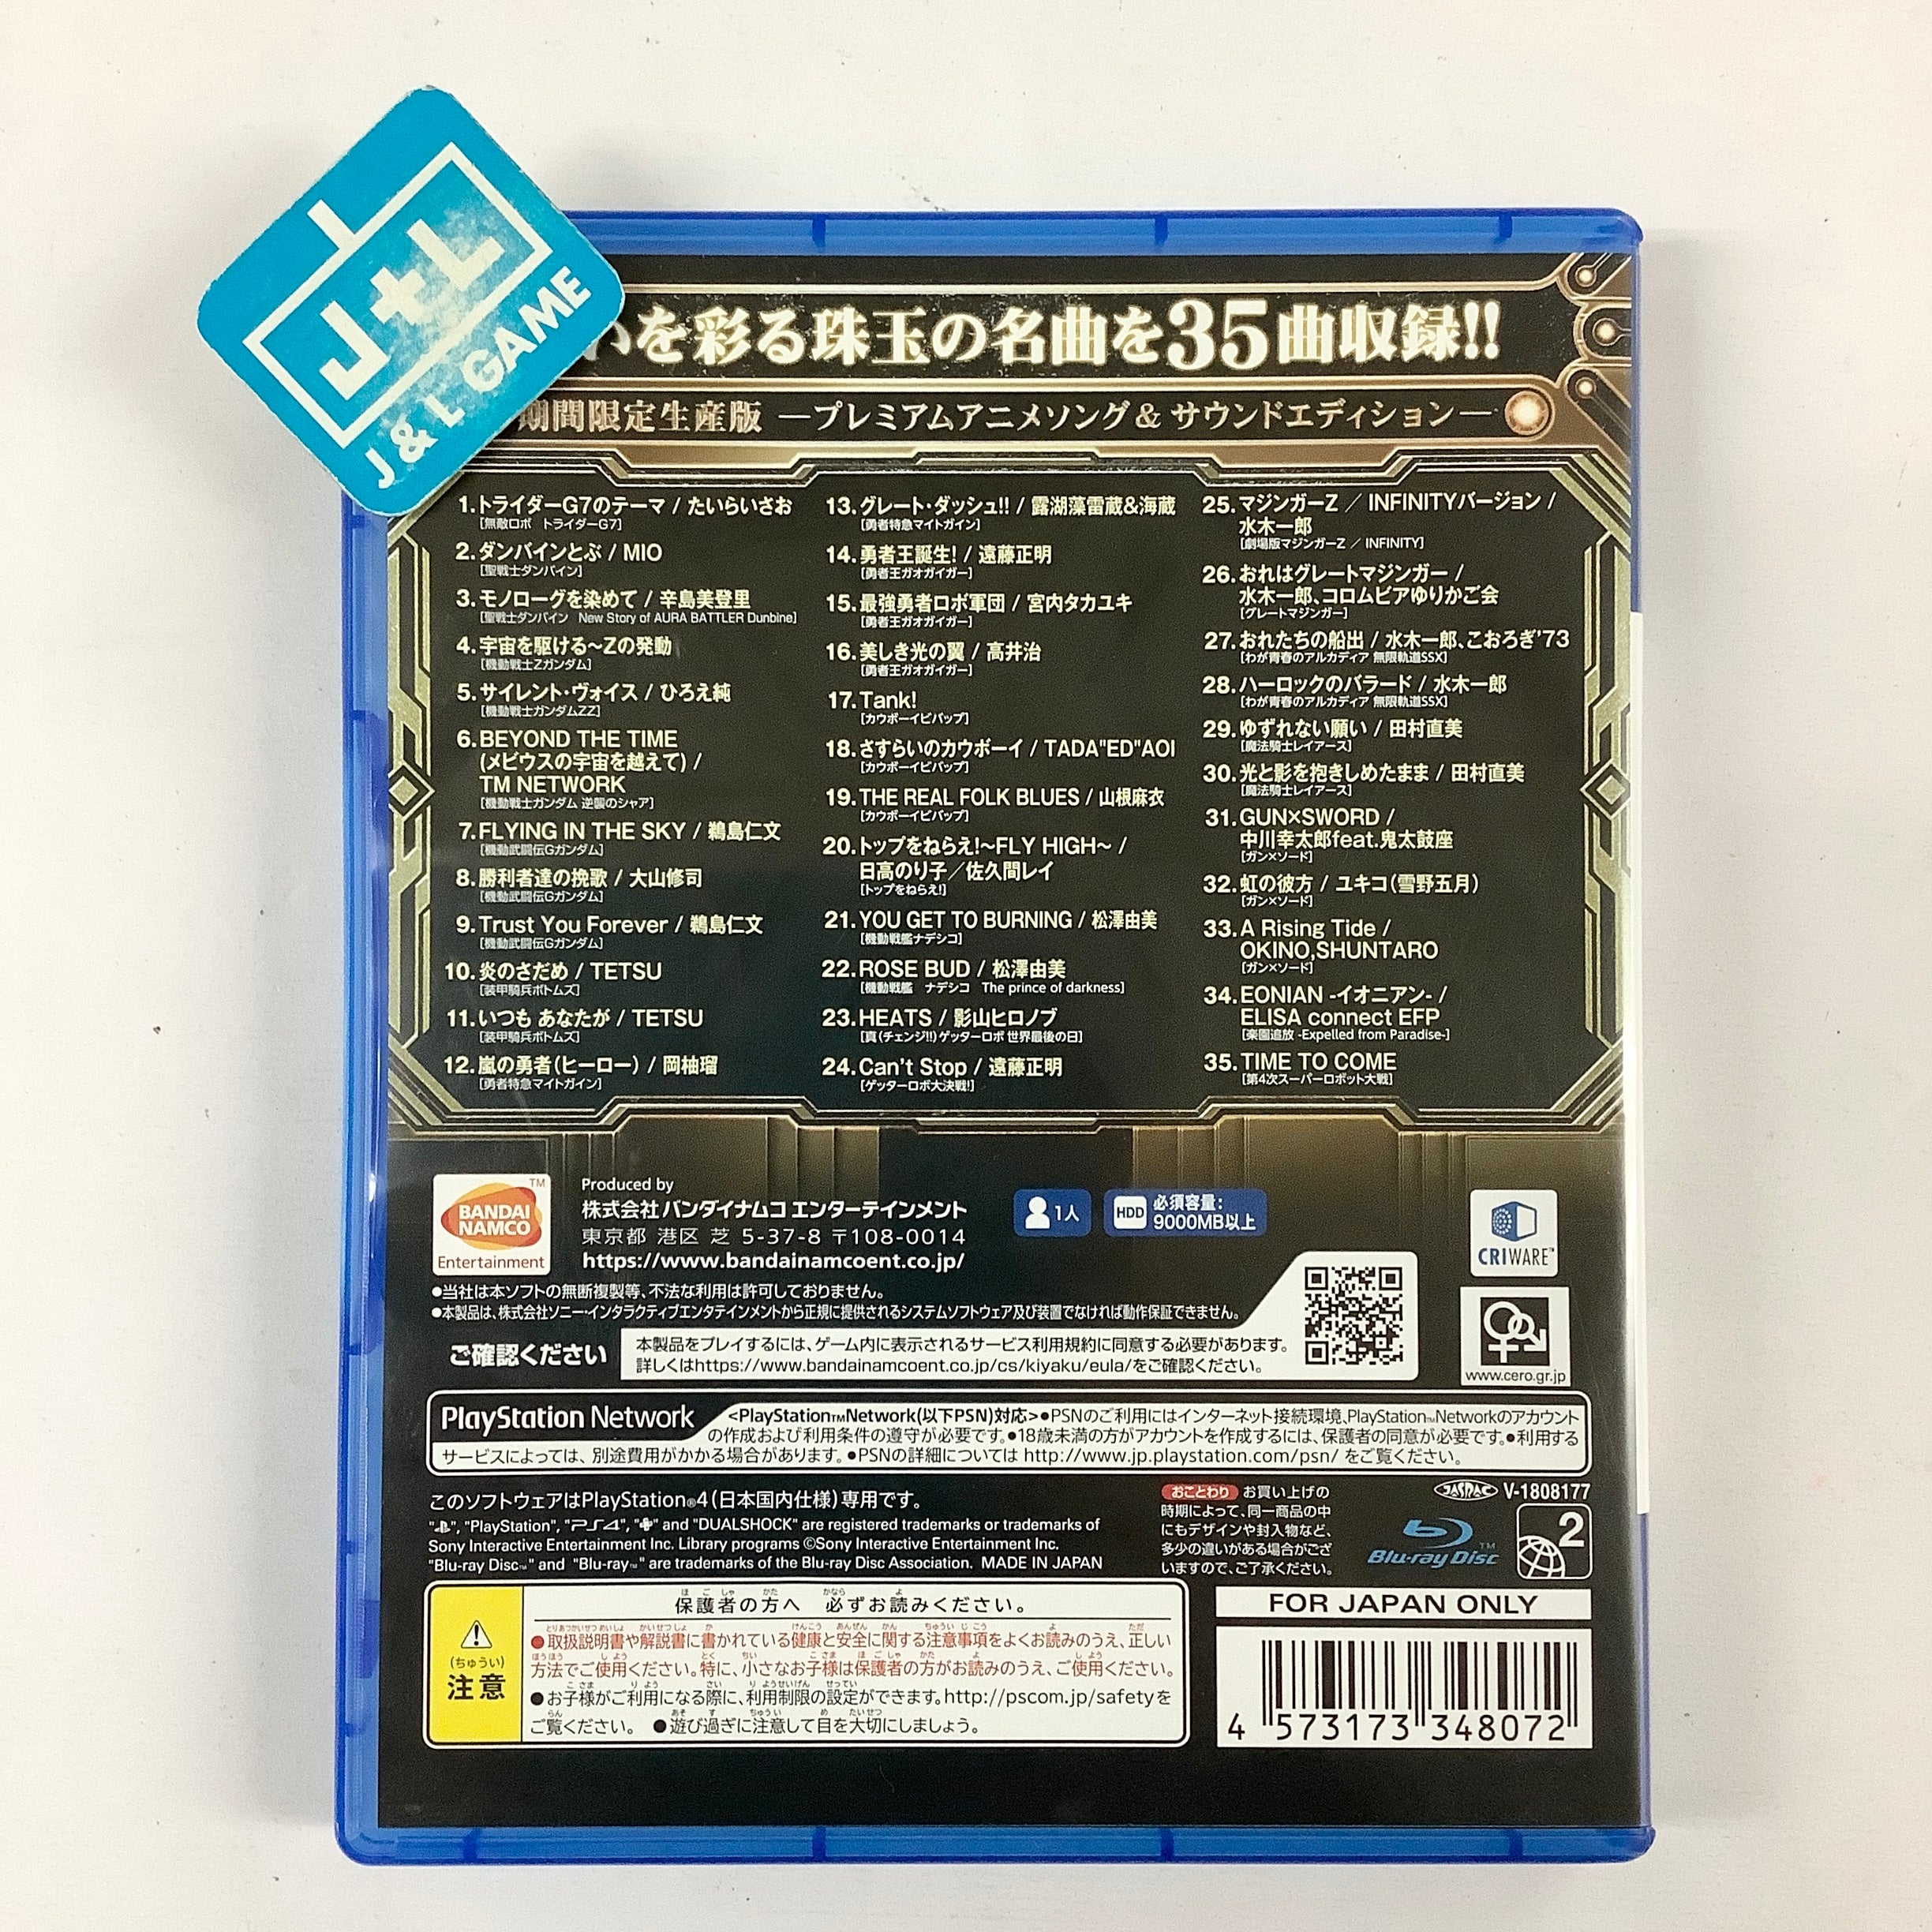 Super Robot Wars T (Premium Anime Song & Sound Edition)- PlayStation 4 [Pre-Owned] (Japanese Import) Video Games Bandai Namco Asia   